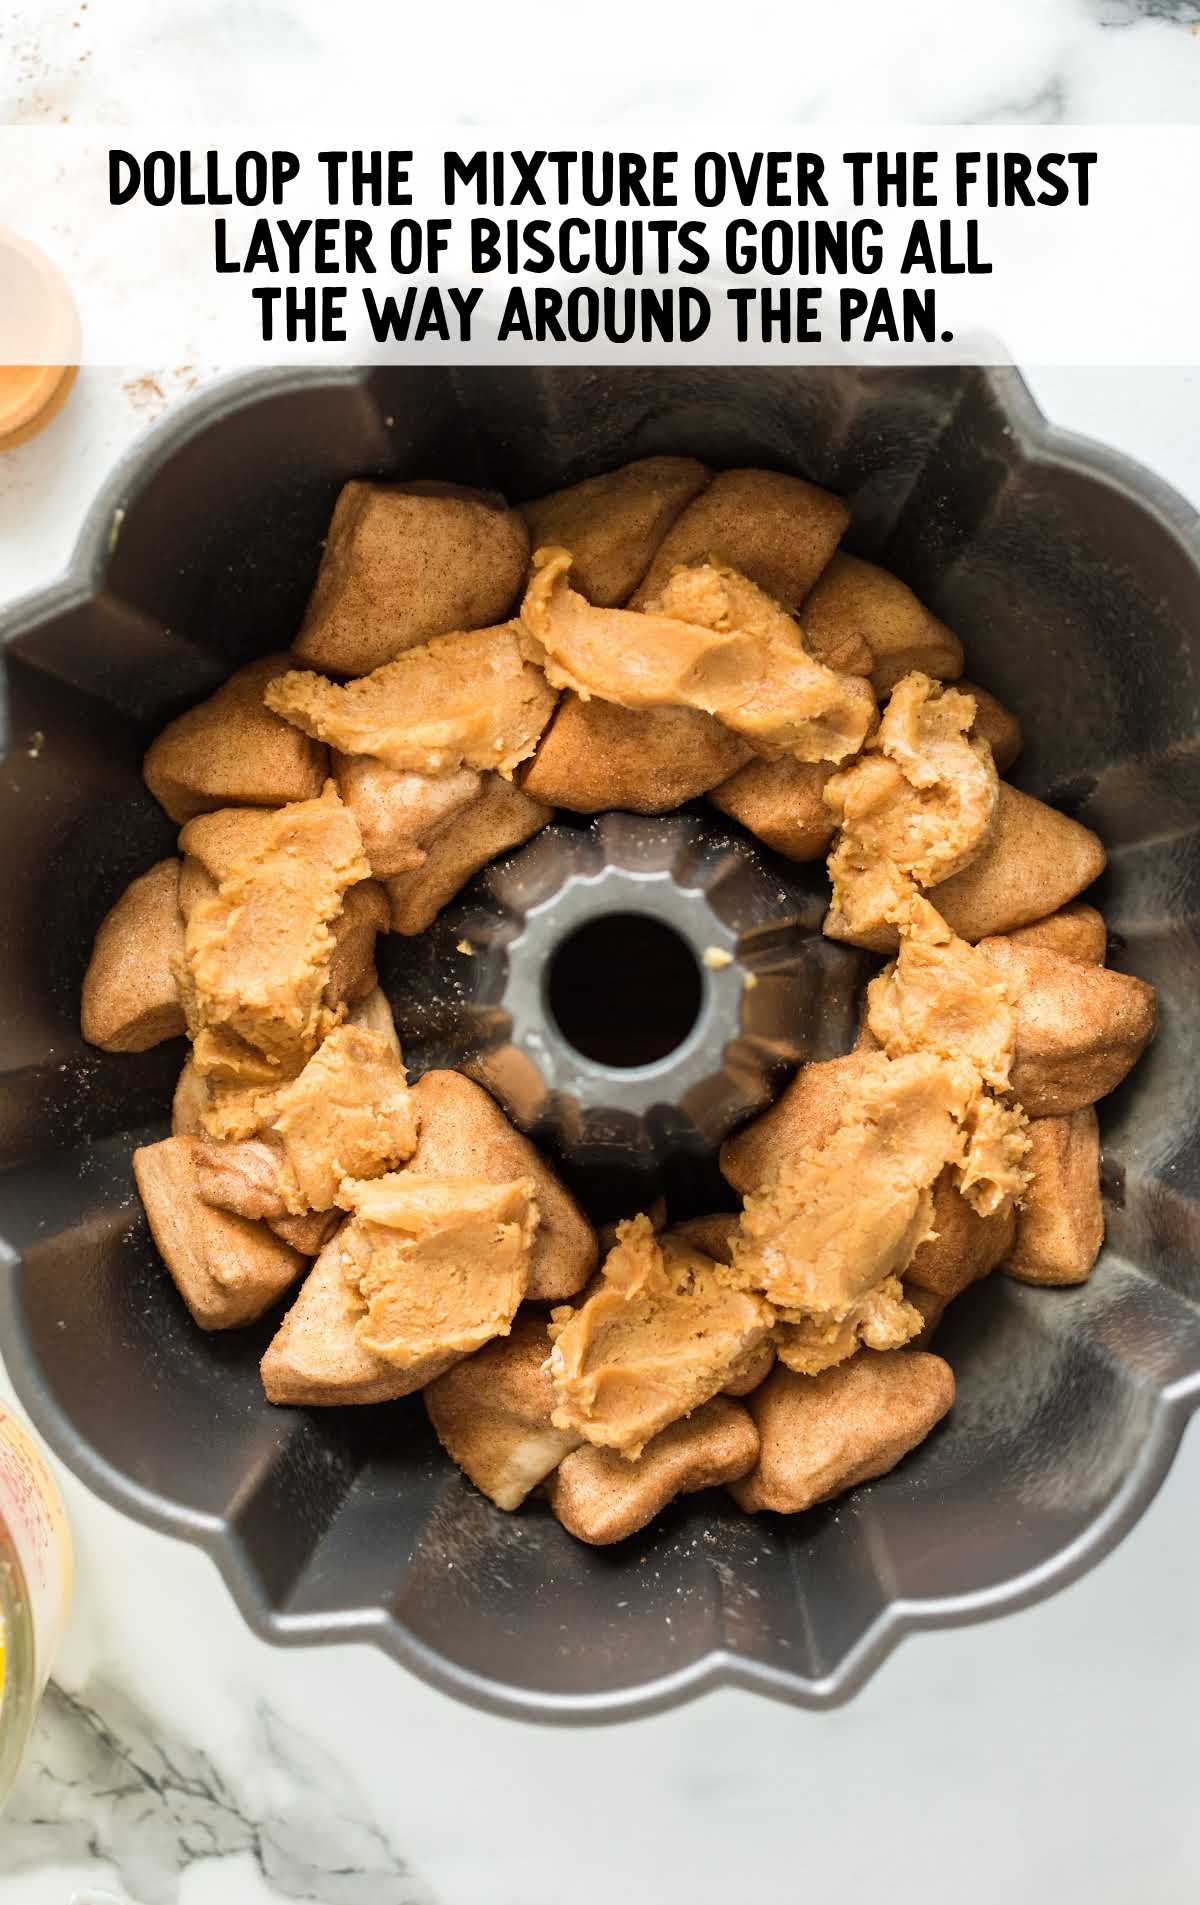 peanut butter mixture placed on top of the biscuits in the bundt pan